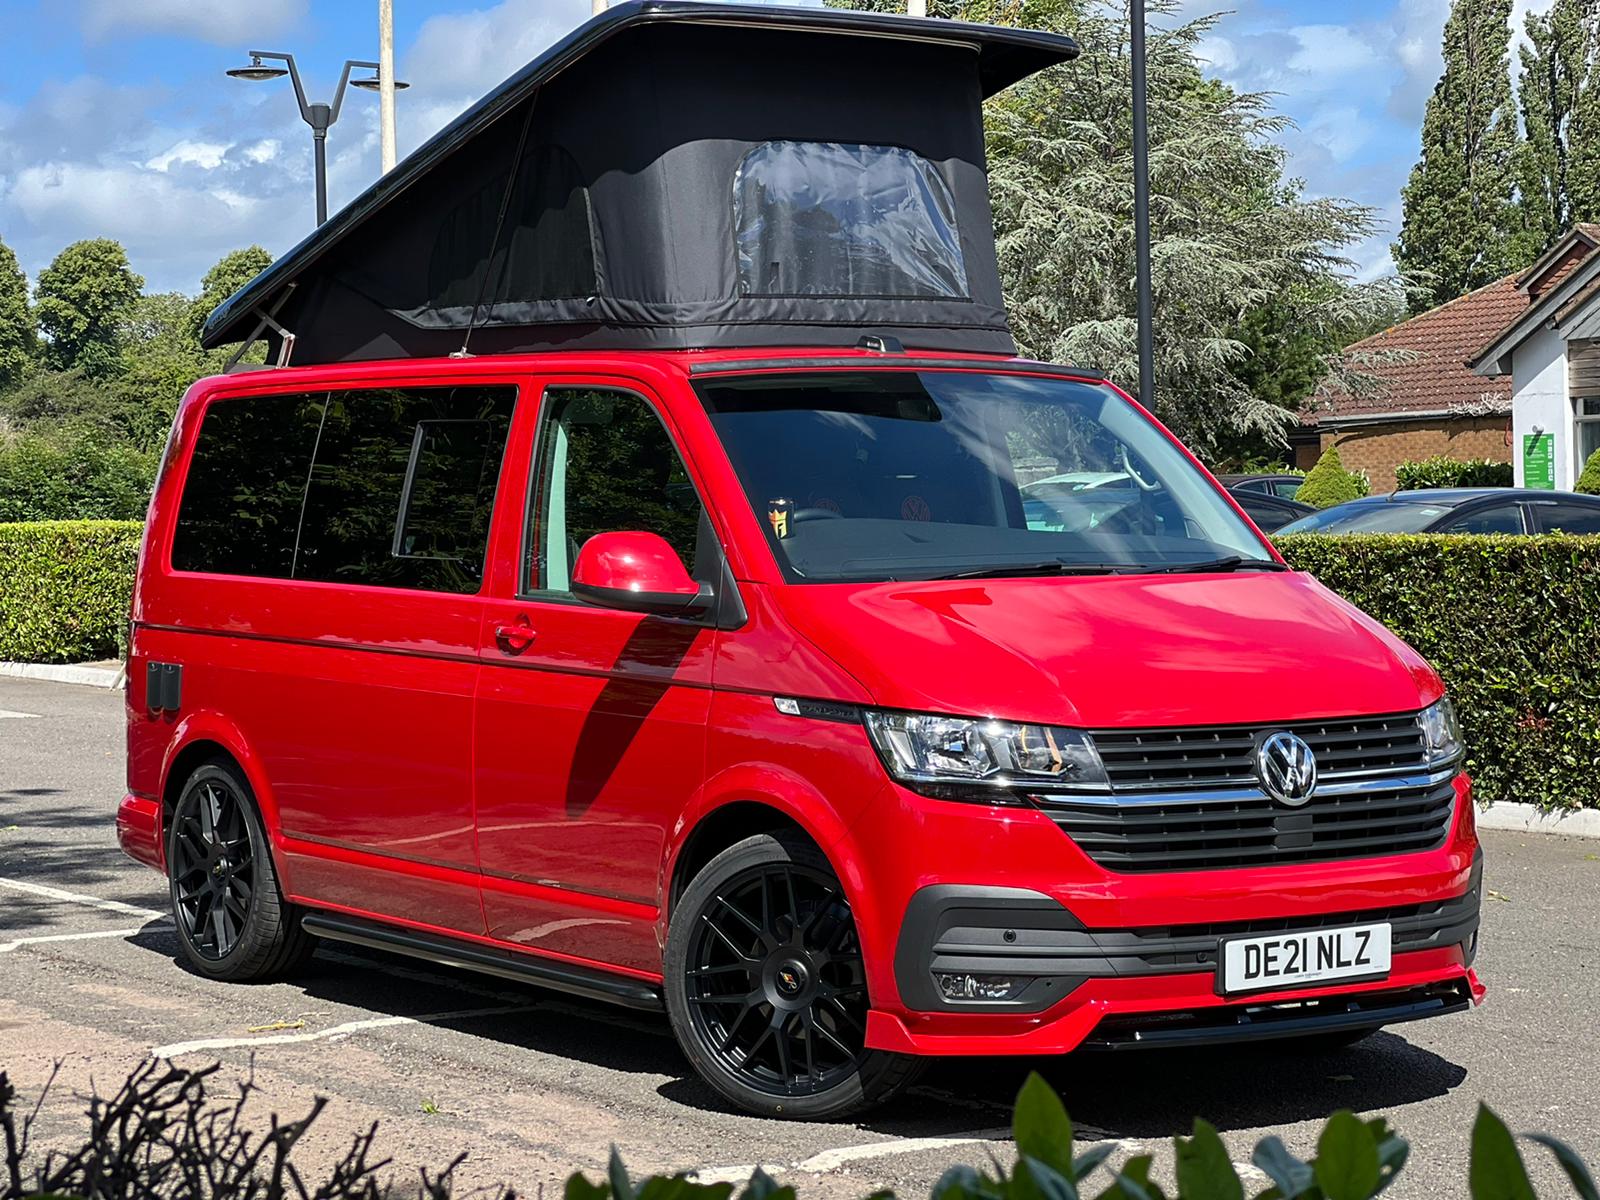 Pedro the 2021 VW Transporter T6.1 - EG Motors - Finished in Hot Hot Hot Chilli Red - 13th July